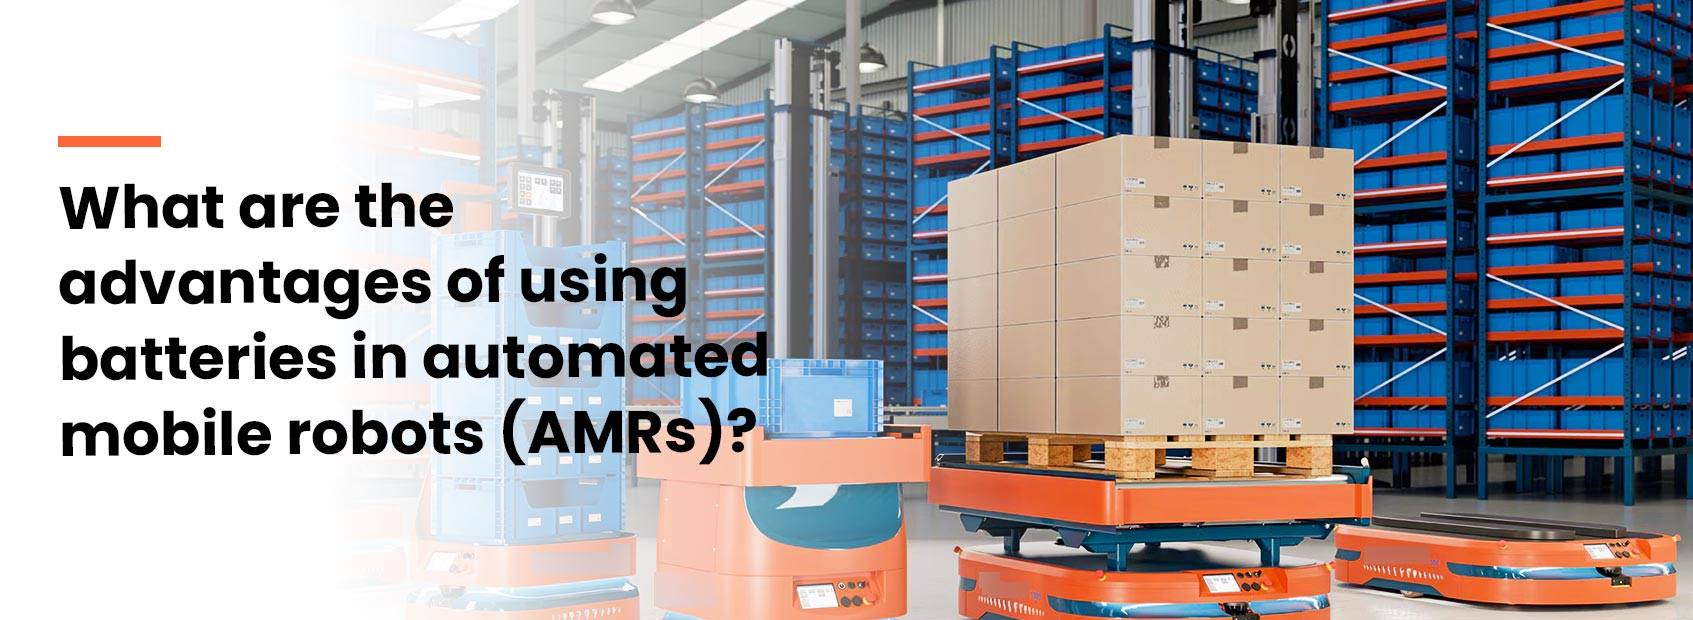 What are the advantages of using batteries in automated mobile robots (AMRs)?